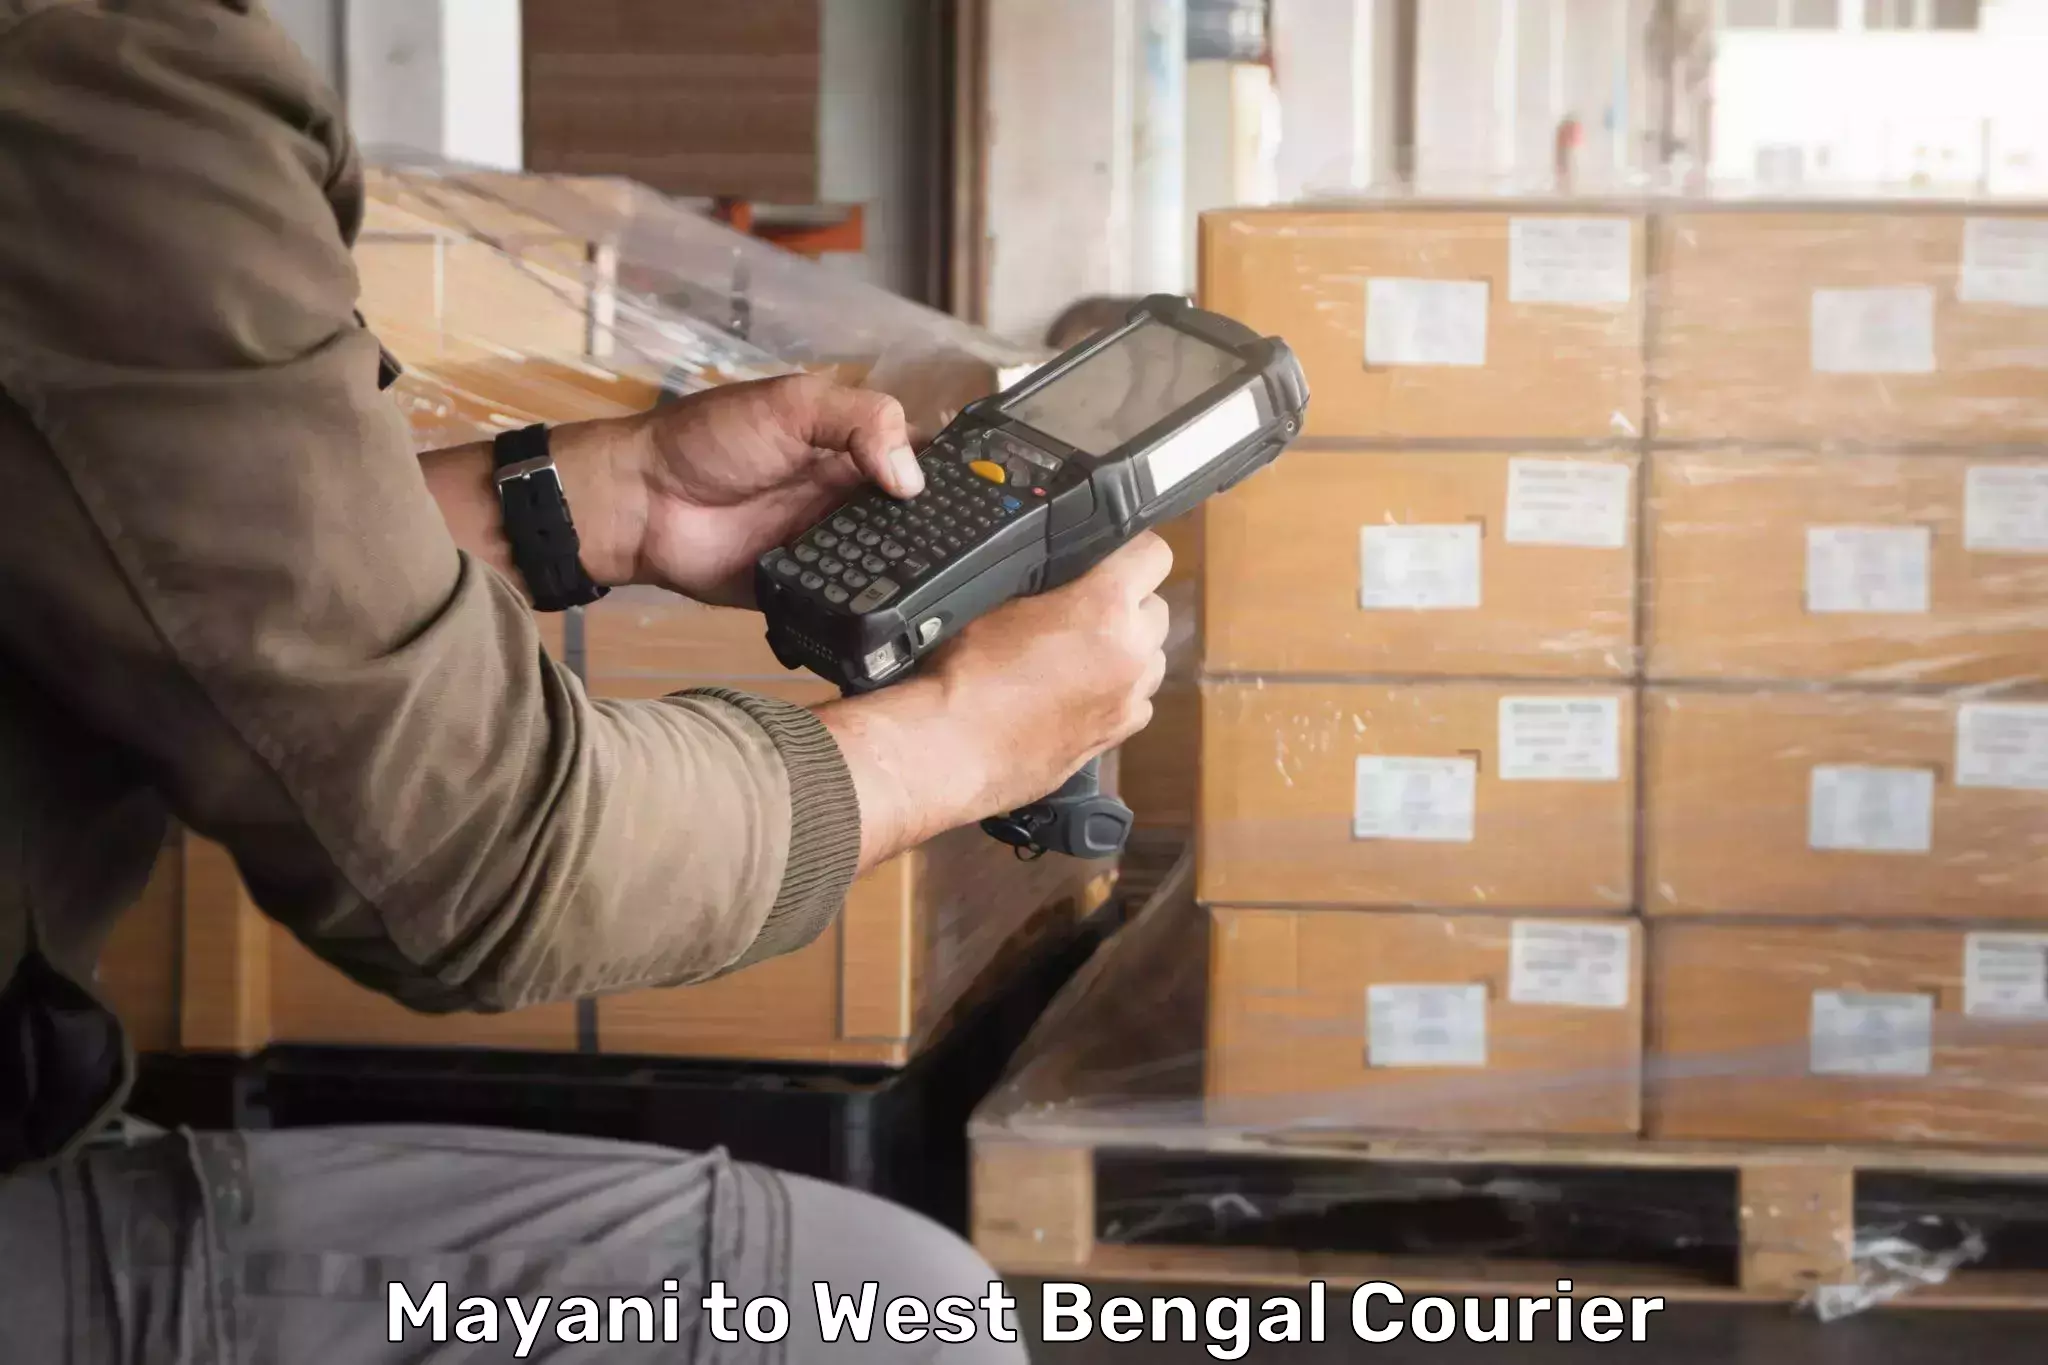 Express delivery solutions in Mayani to Kolkata Port